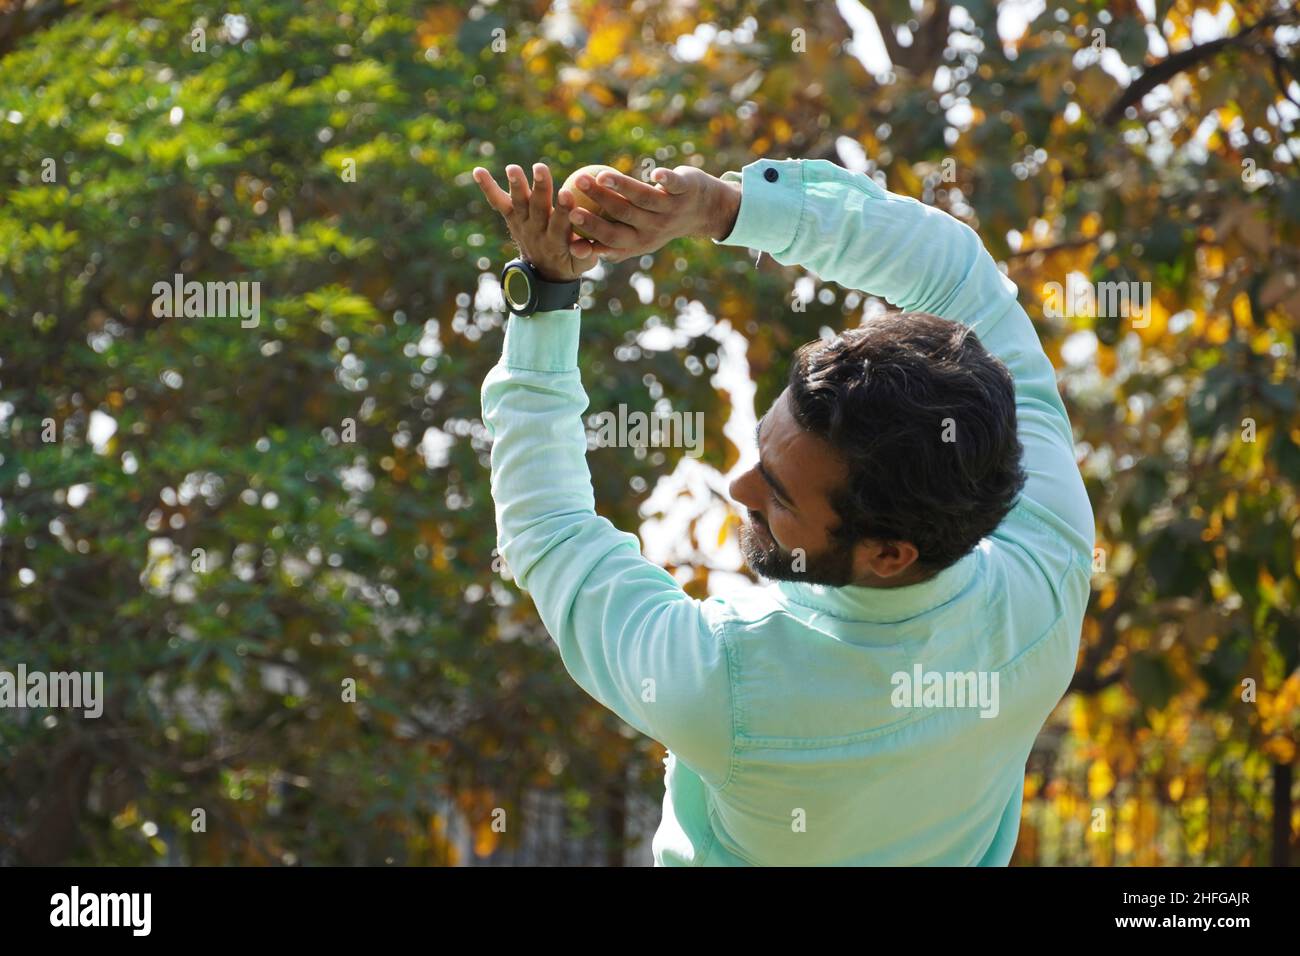 Indian man in action of catching ball in cricket match Stock Photo